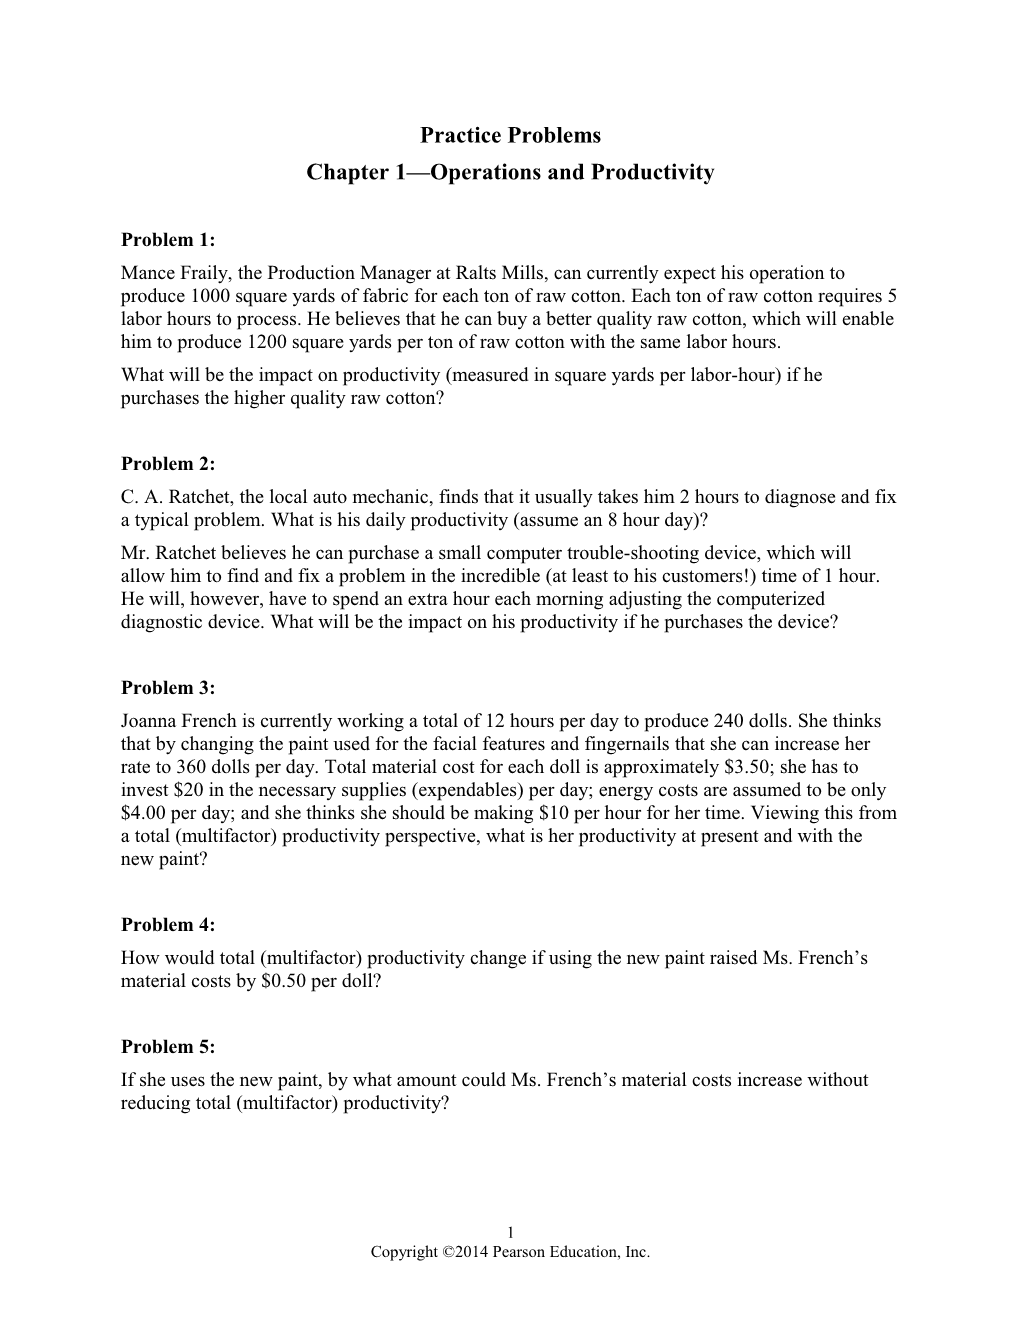 B Practice Problems: Chapter 1, Operations and Productivity /B